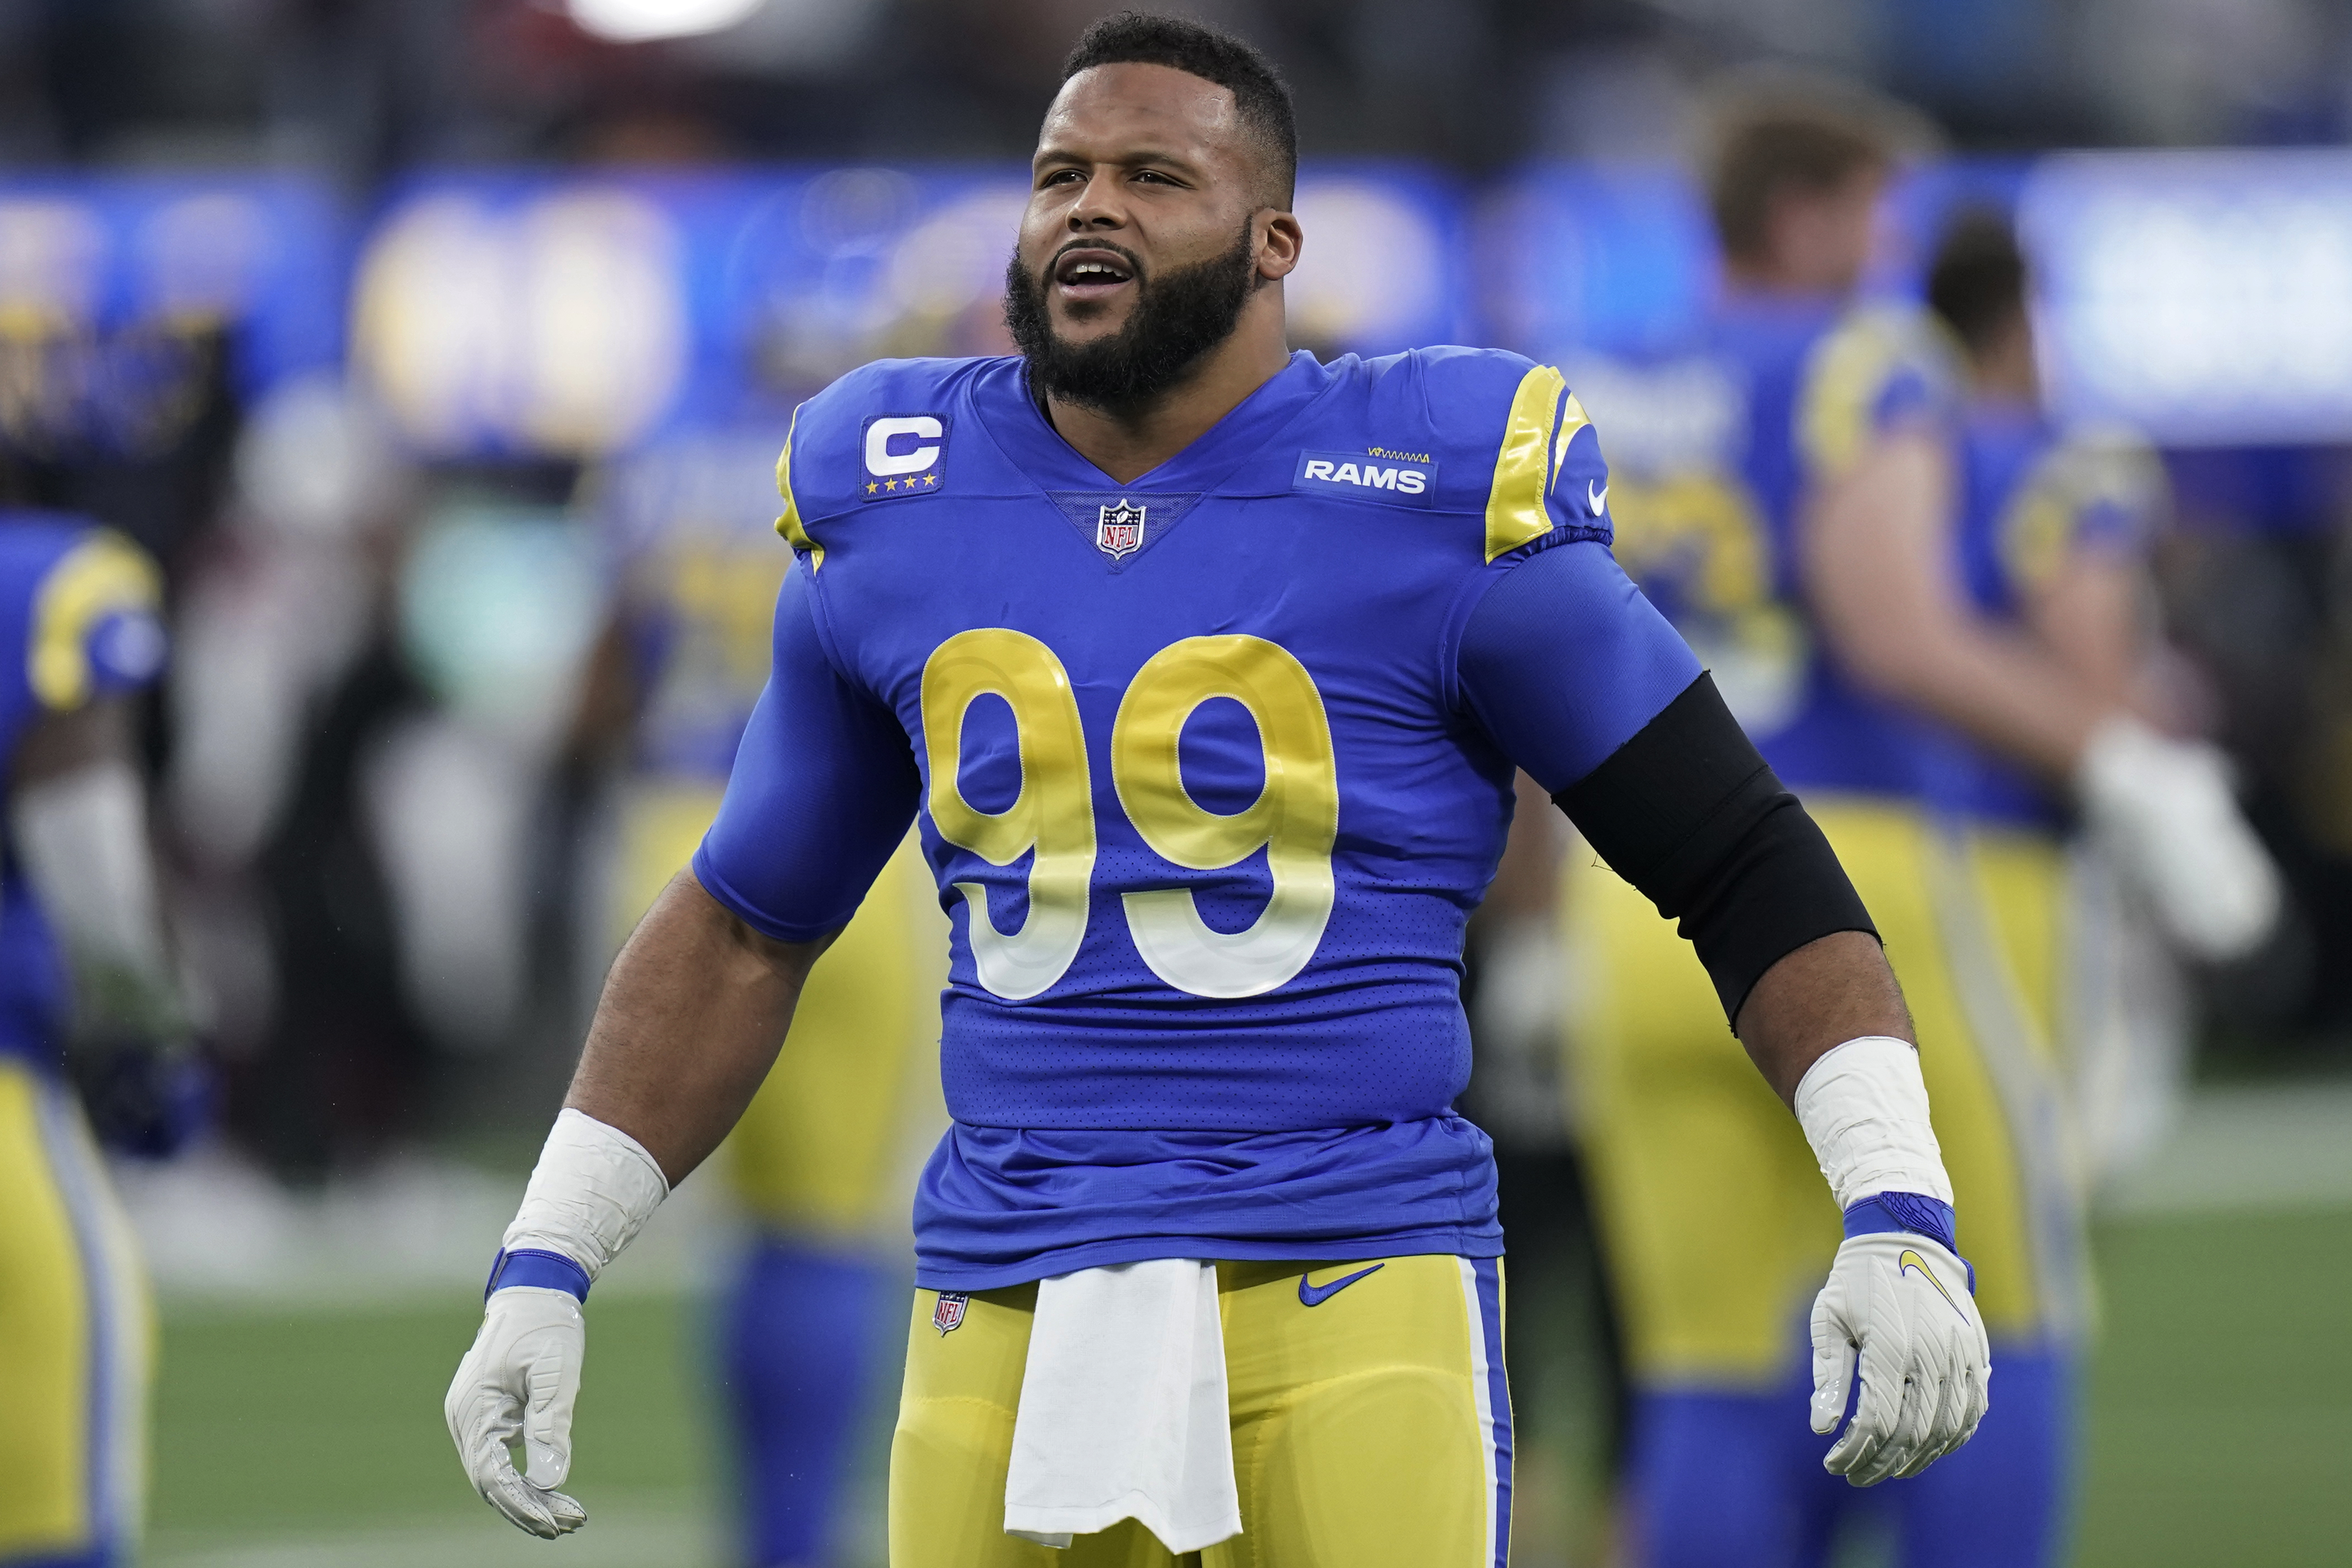 Aaron Donald has made the Pro Bowl in EVERY season during his NFL career  (9x) ￼